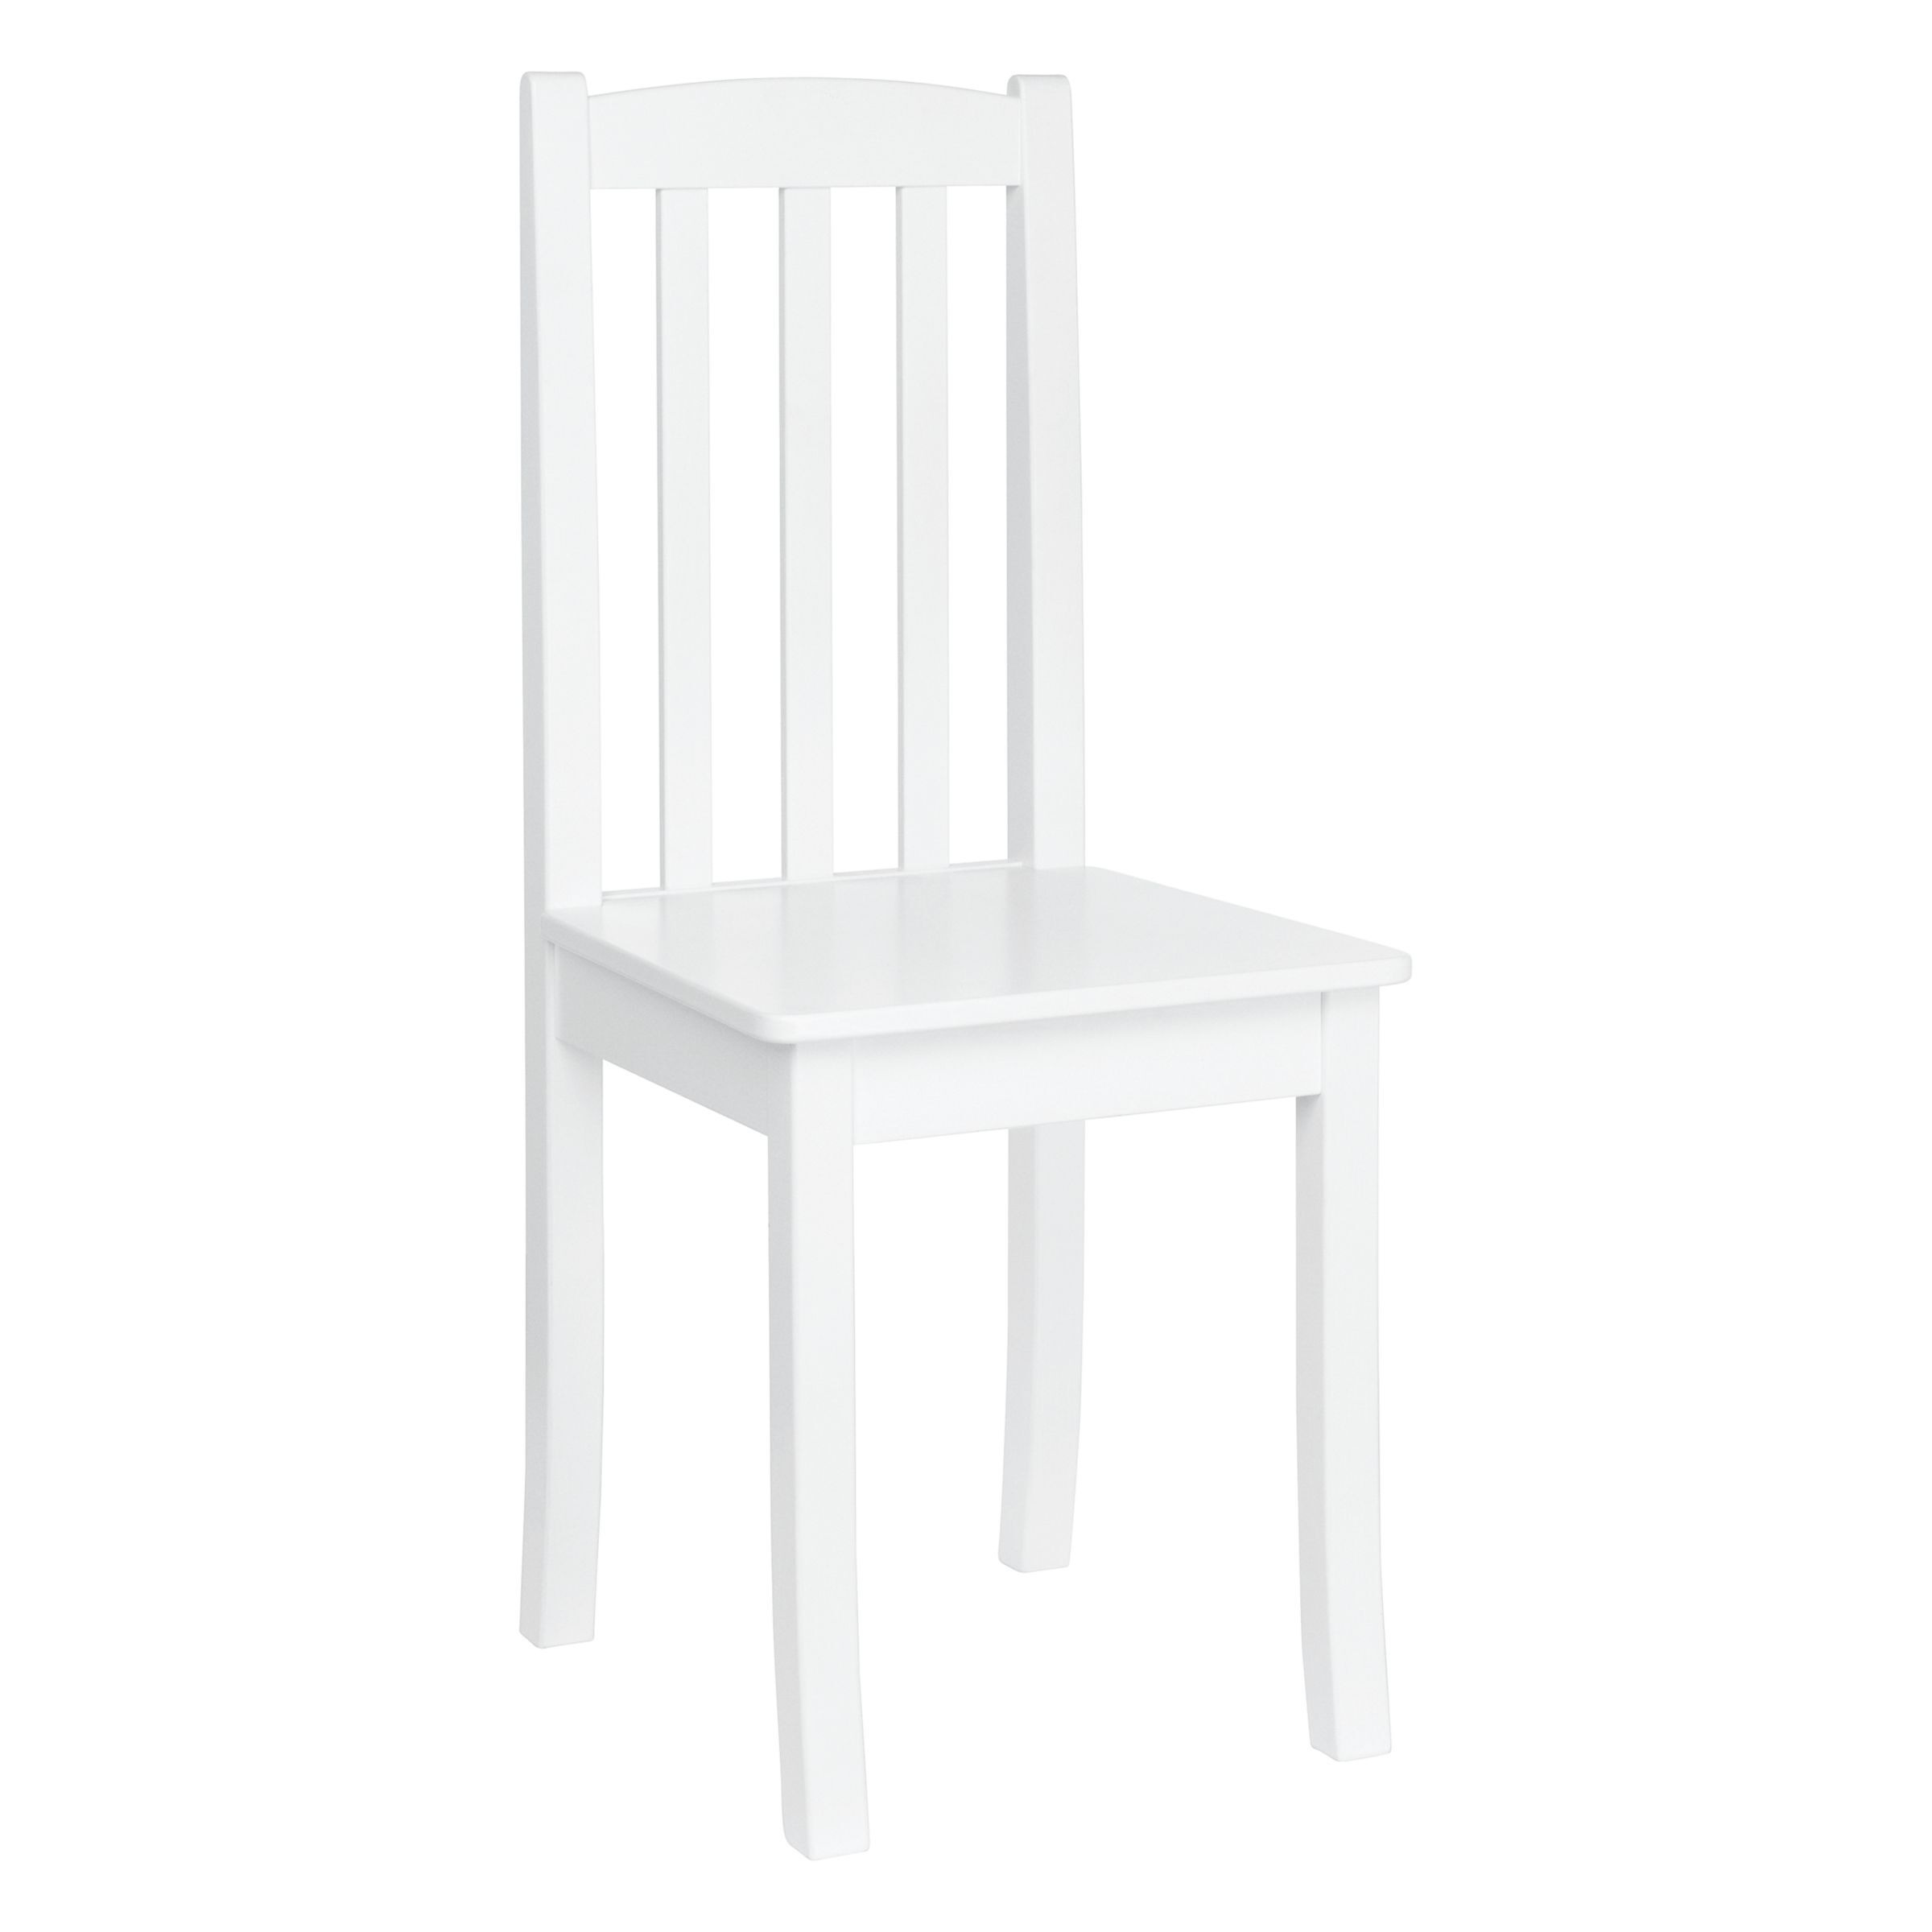 Great Little Trading Co Nelson Desk Chair, White - image 1